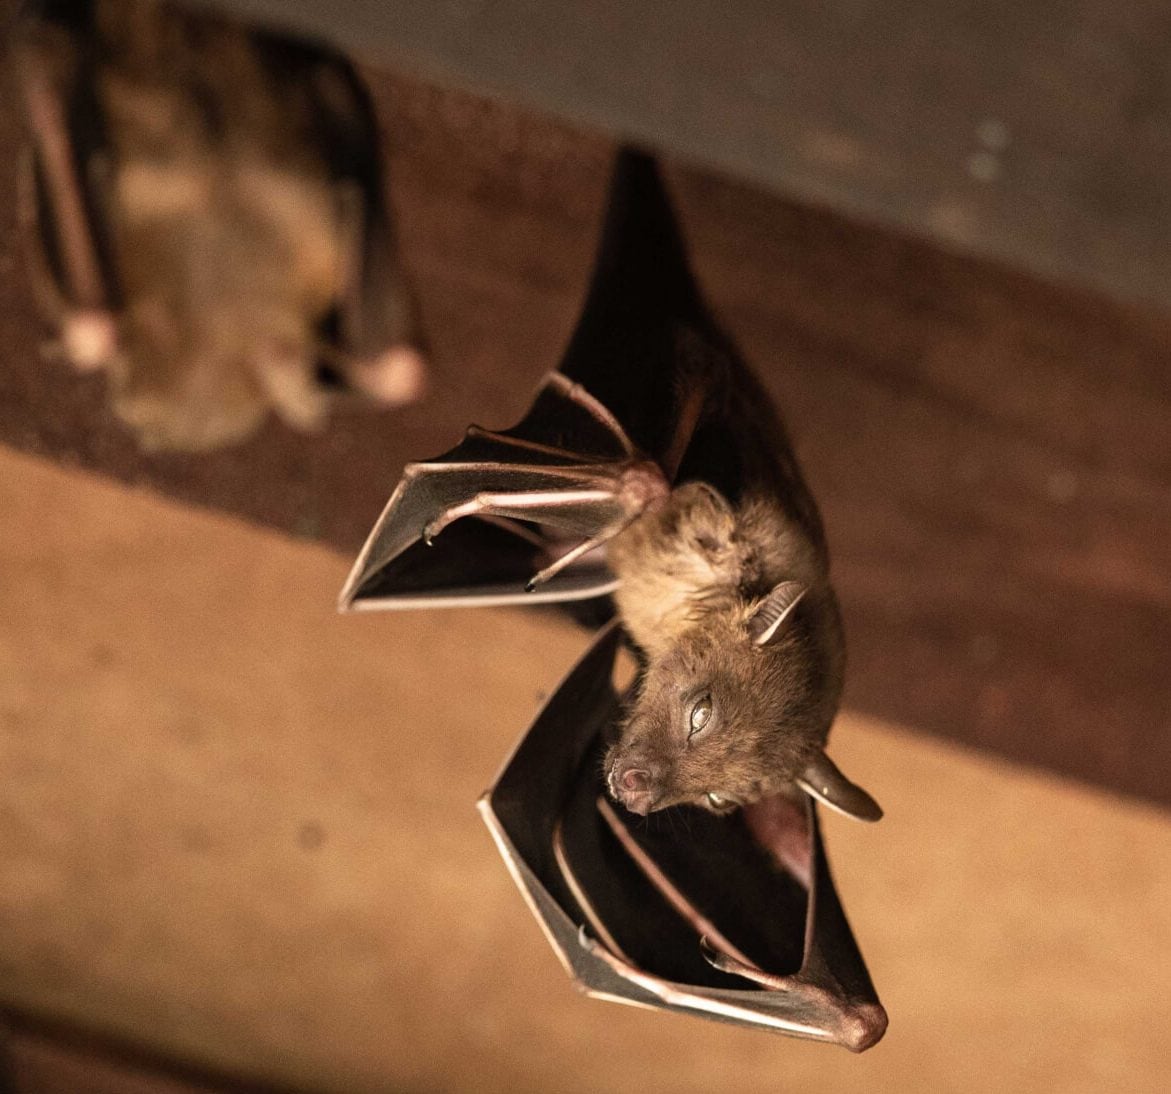 Expert bat removal services for a safe and humane solution in Boston